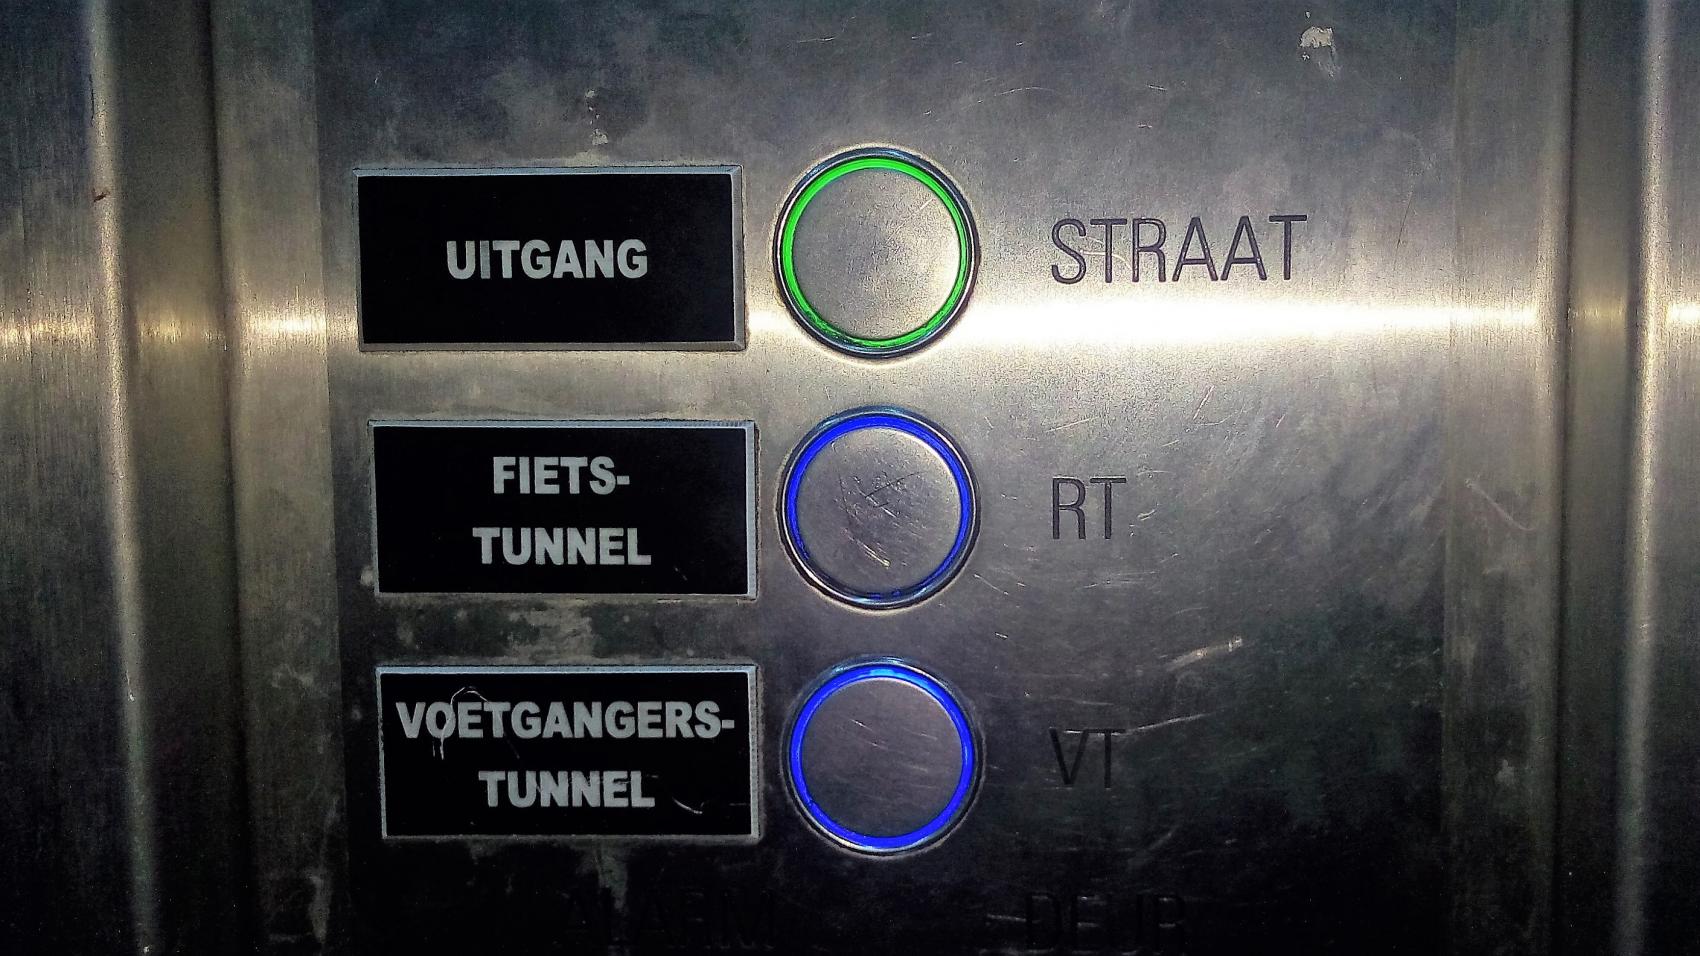 Elevators connect street (straat) level, cycling (fiets-) tunnel level and pedestrian (voetgangers-) tunnel level. 